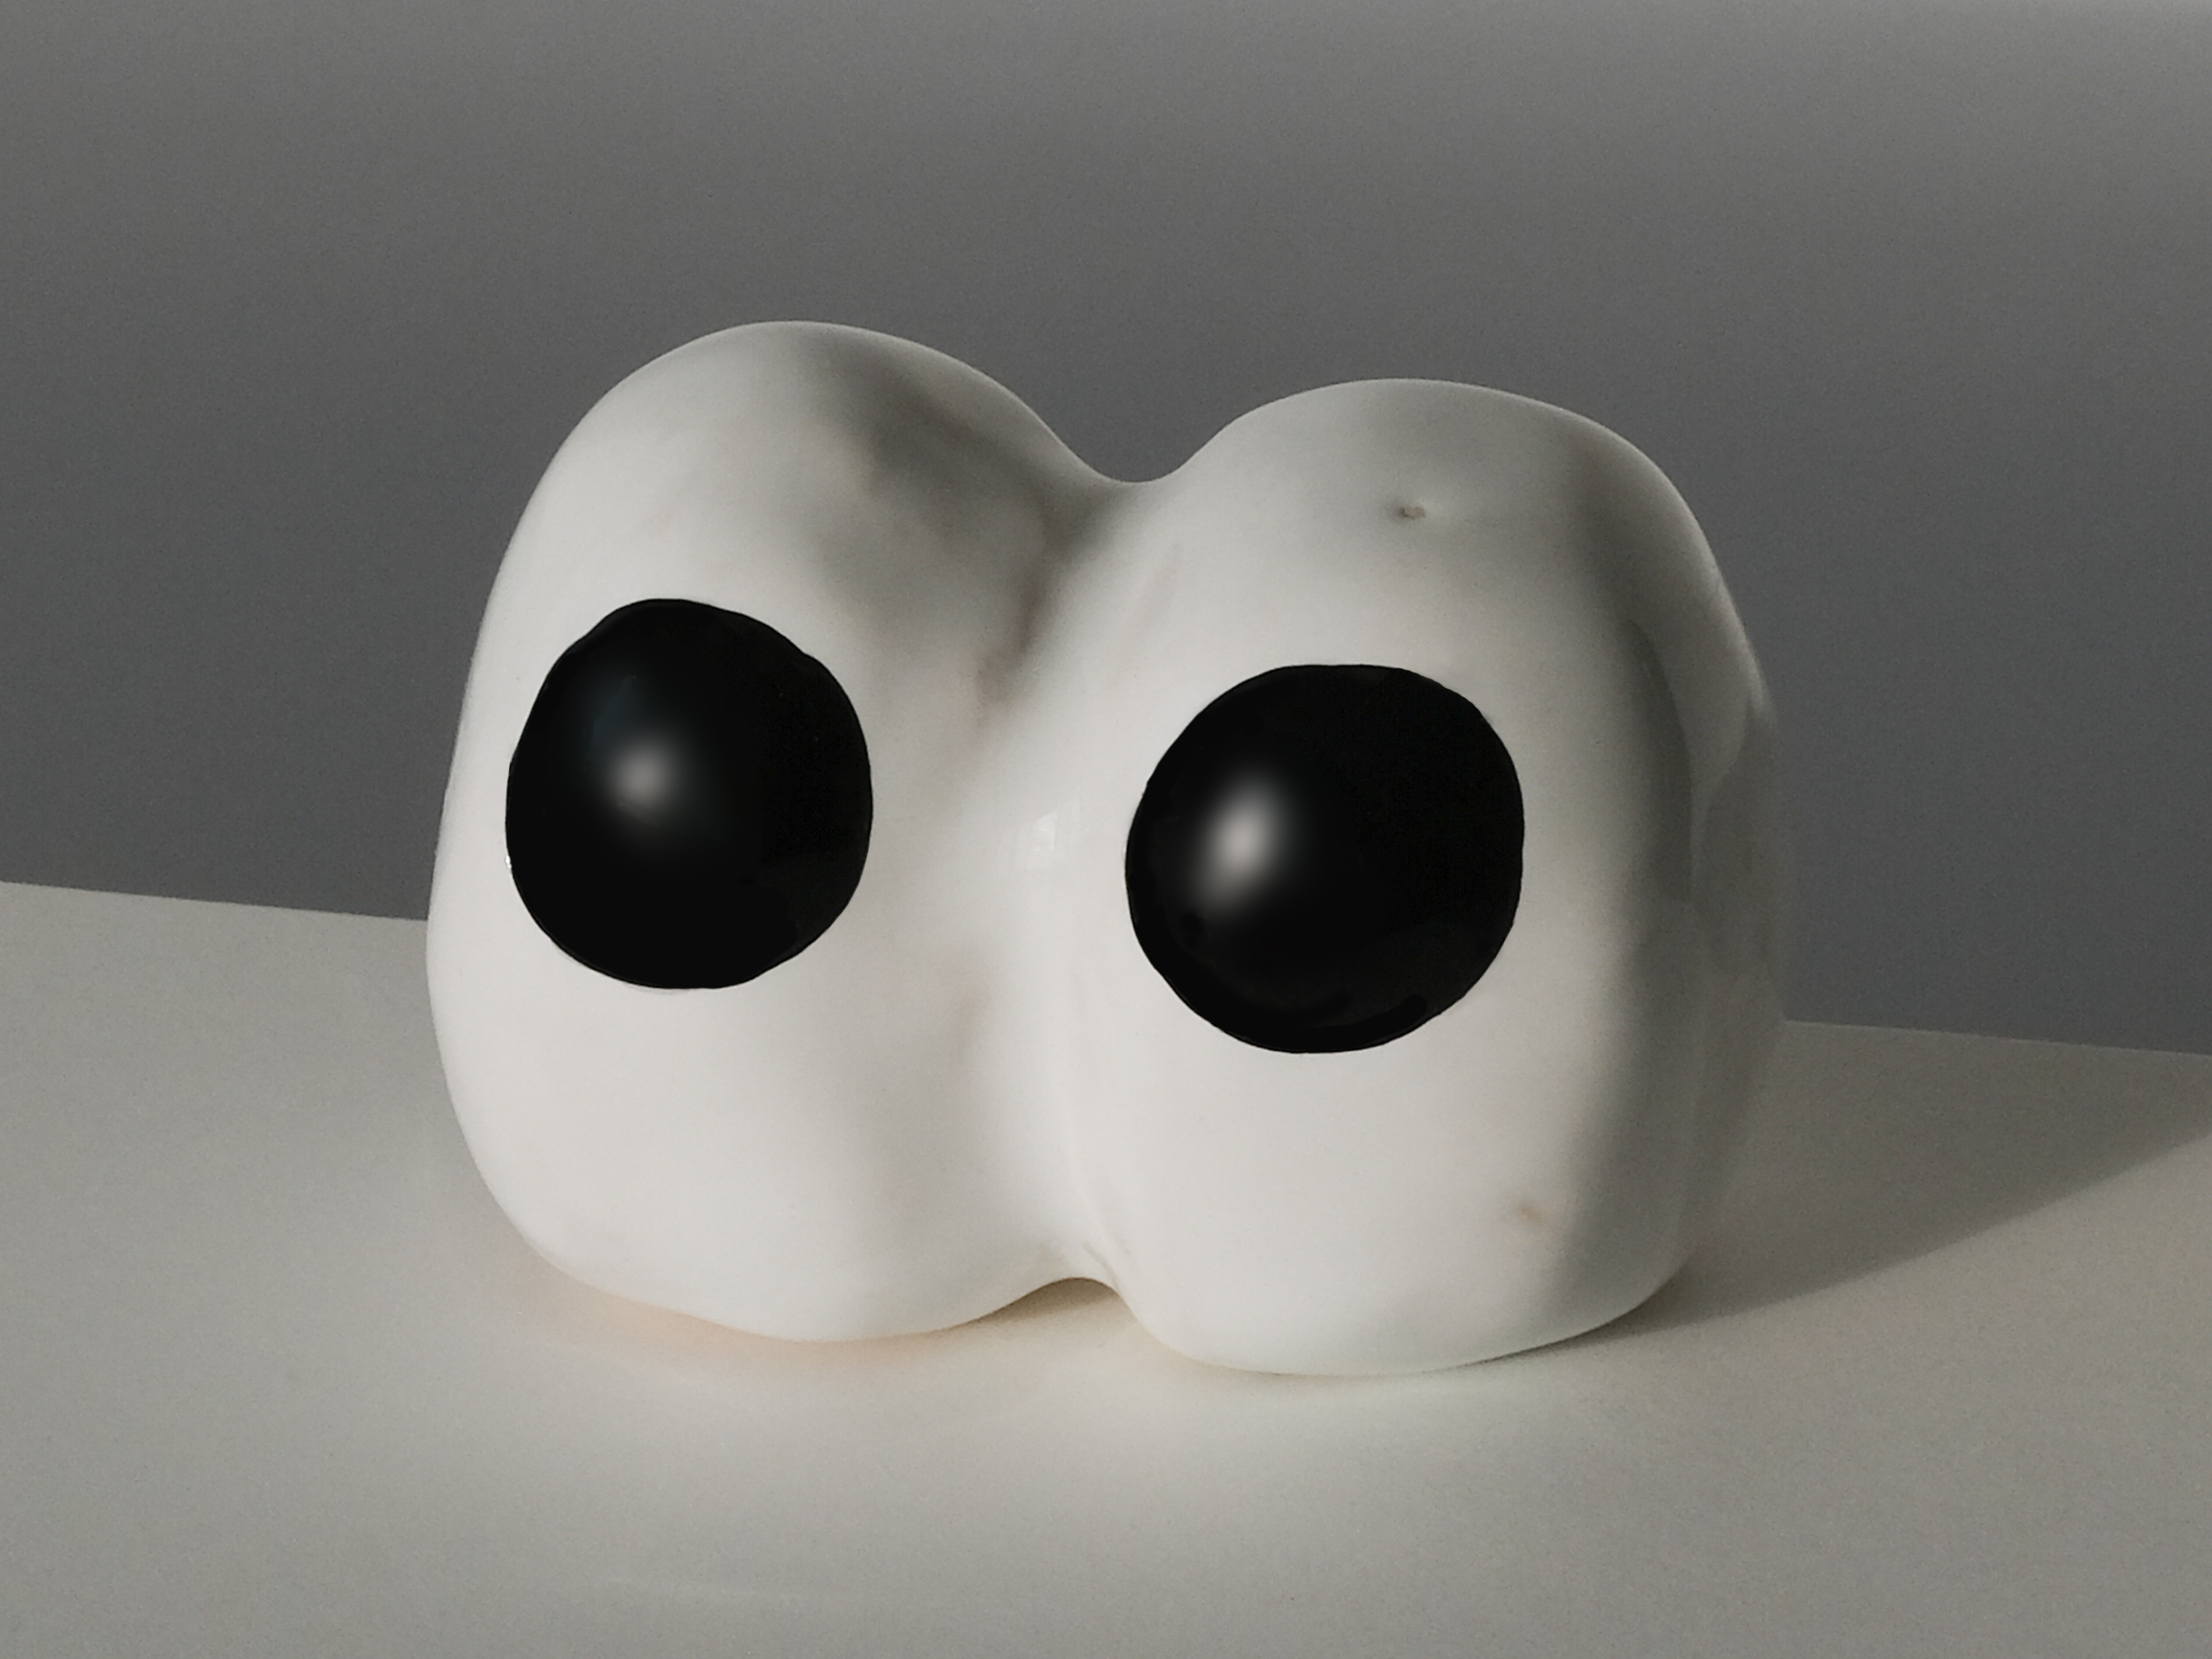 A pair of eyes made from clay stadning on a white surface